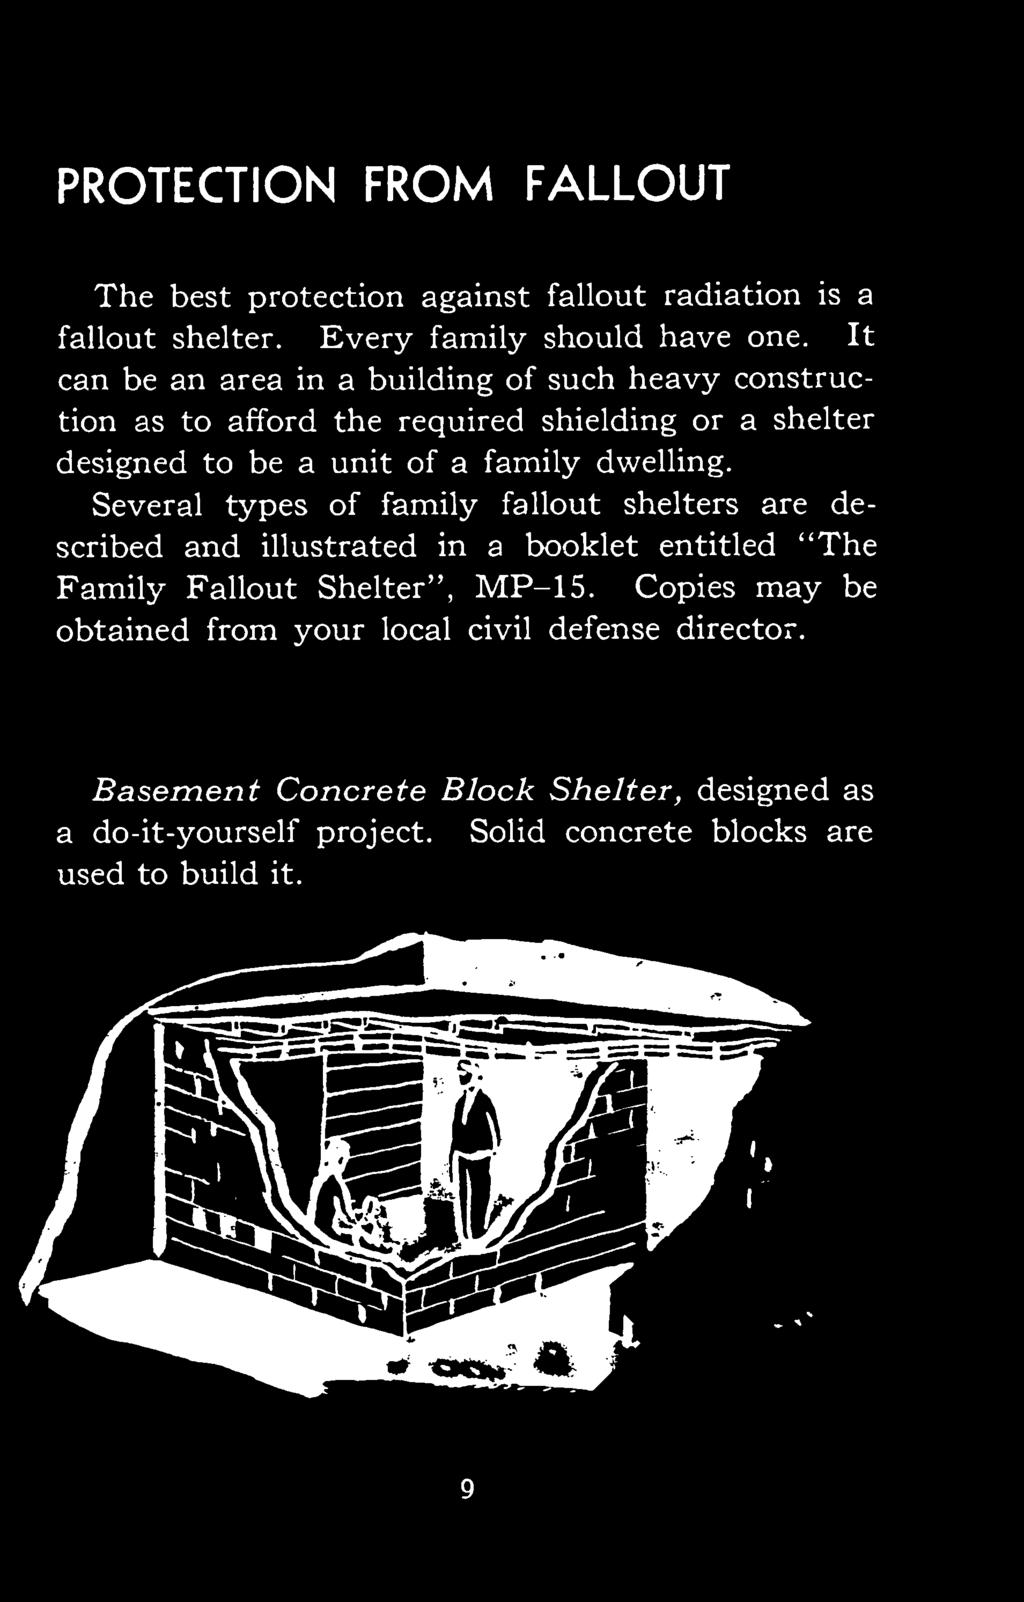 Several types of family fallout shelters are described and illustrated in a booklet entitled